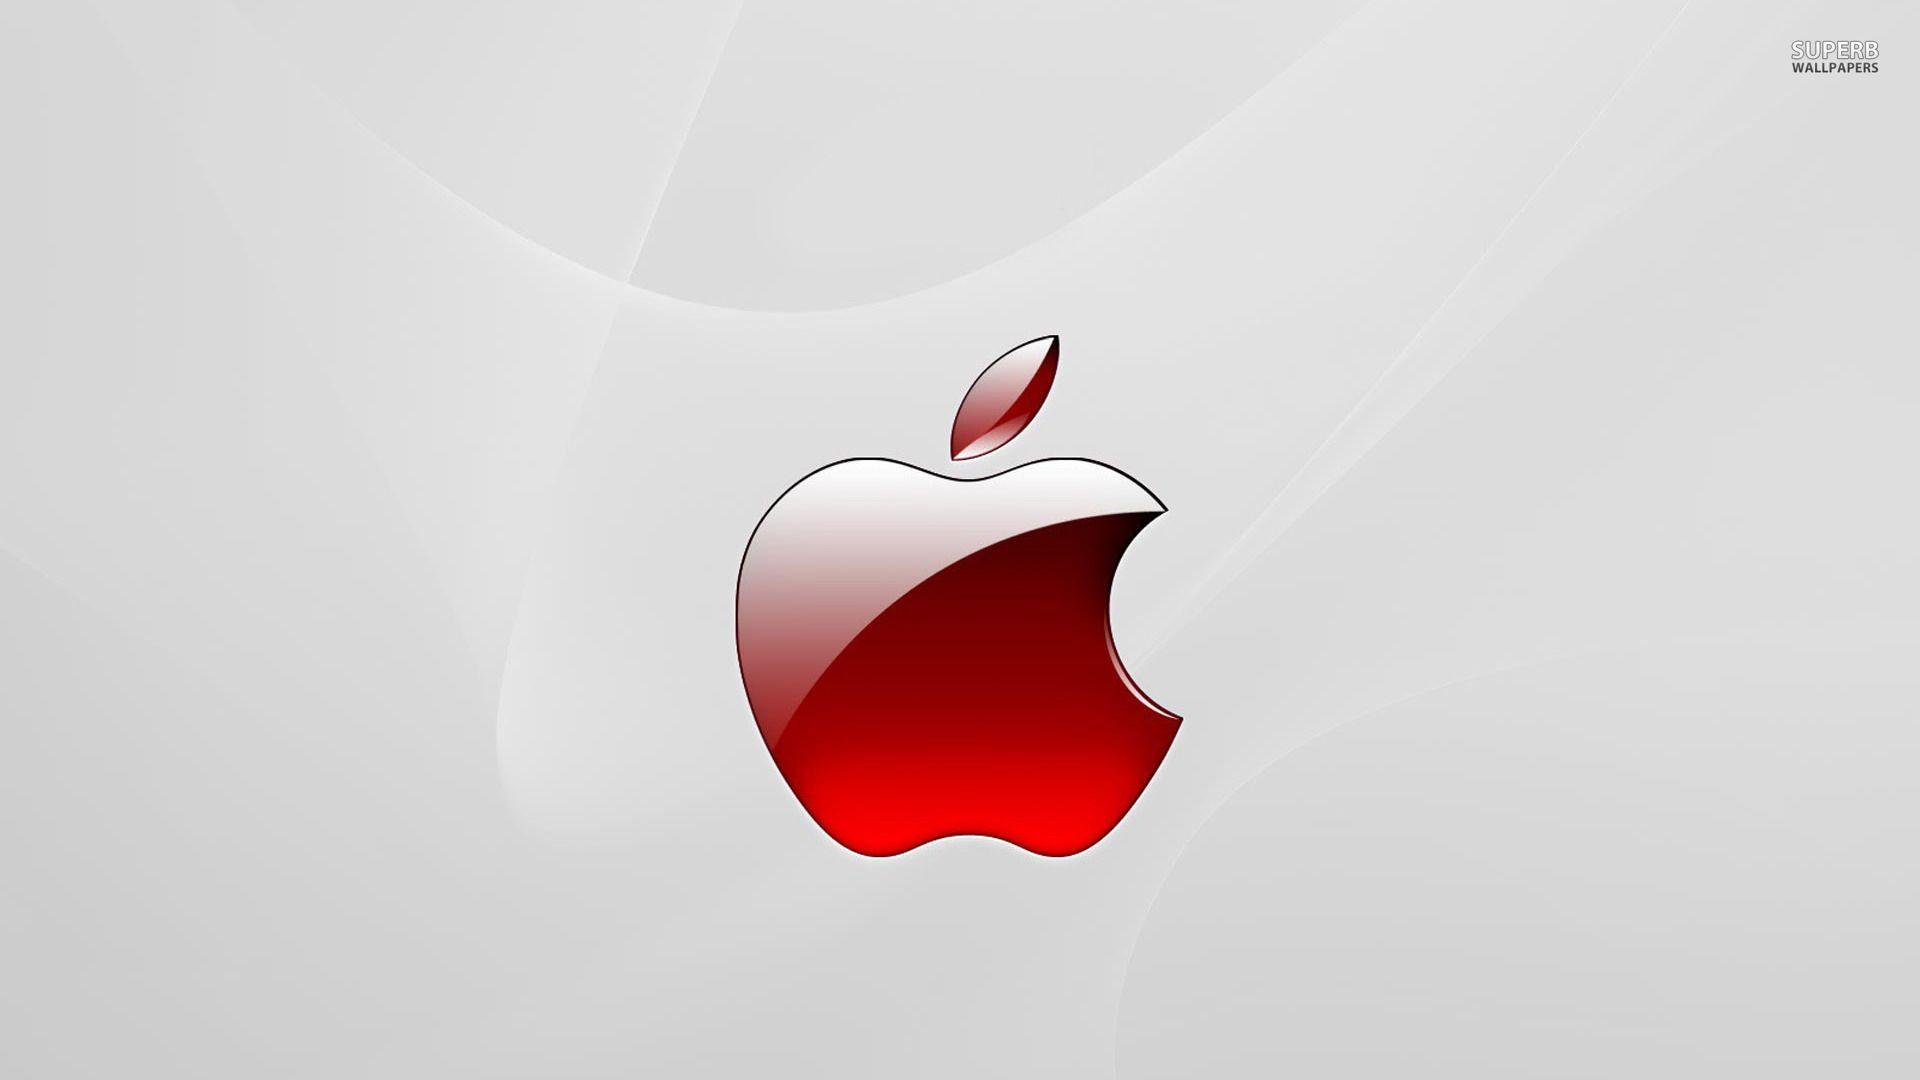 Red White Blue Apple Logo - Red Apple Logo Wallpapers - Wallpaper Cave